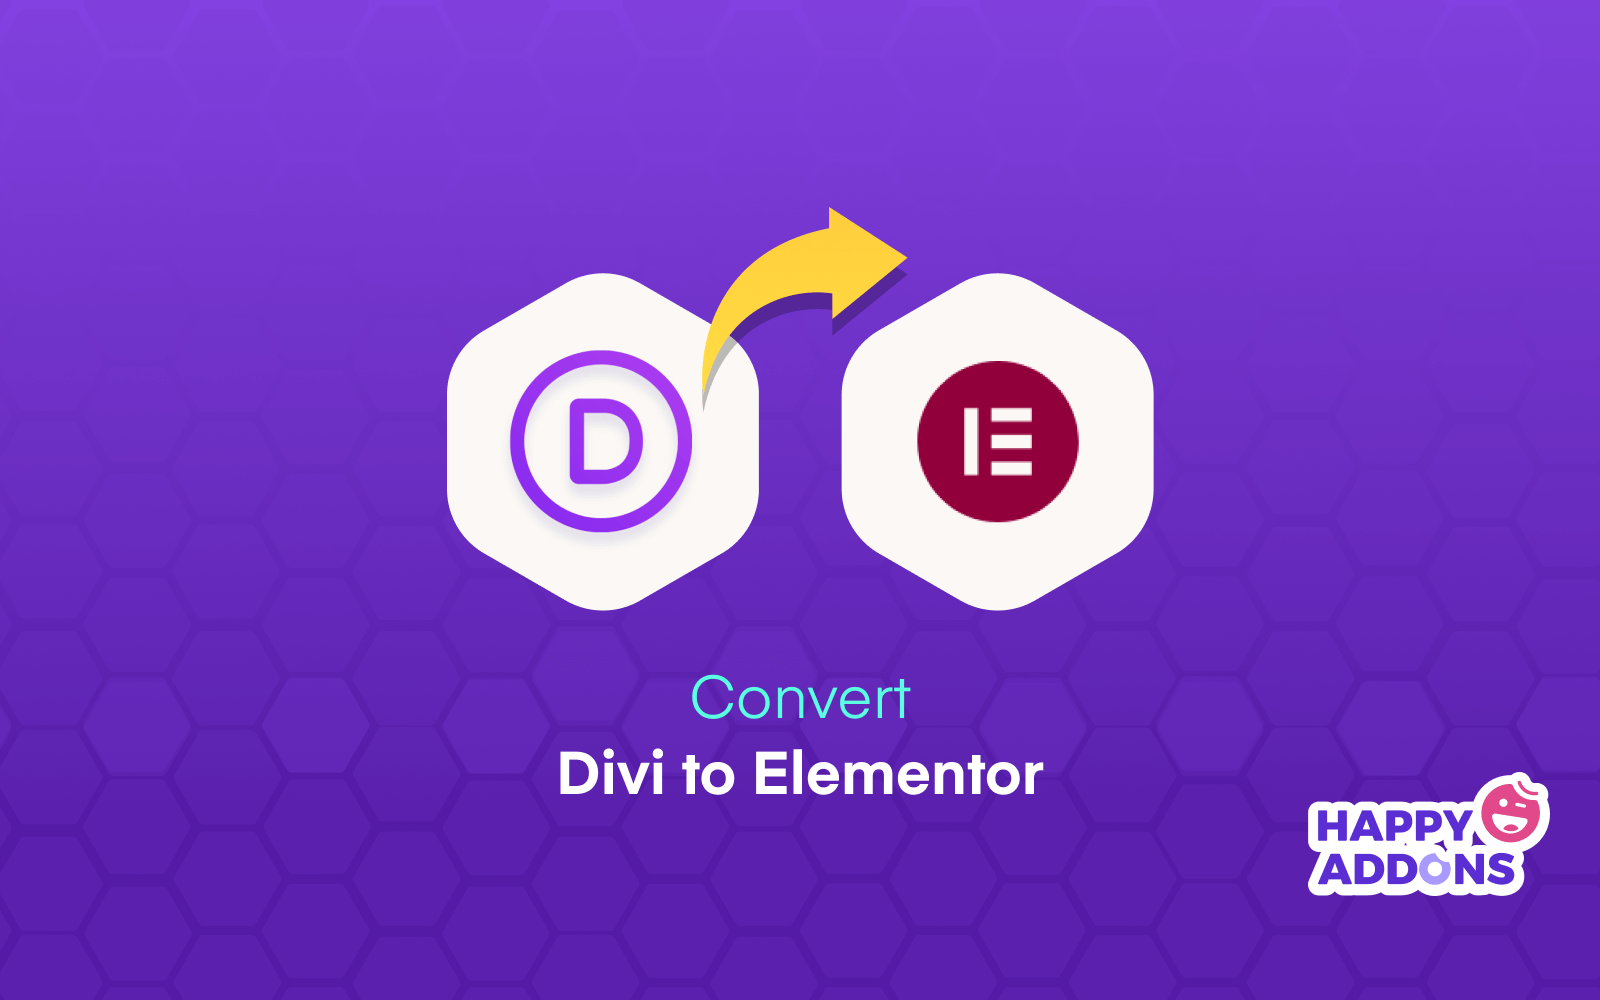 How to Convert Divi to Elementor